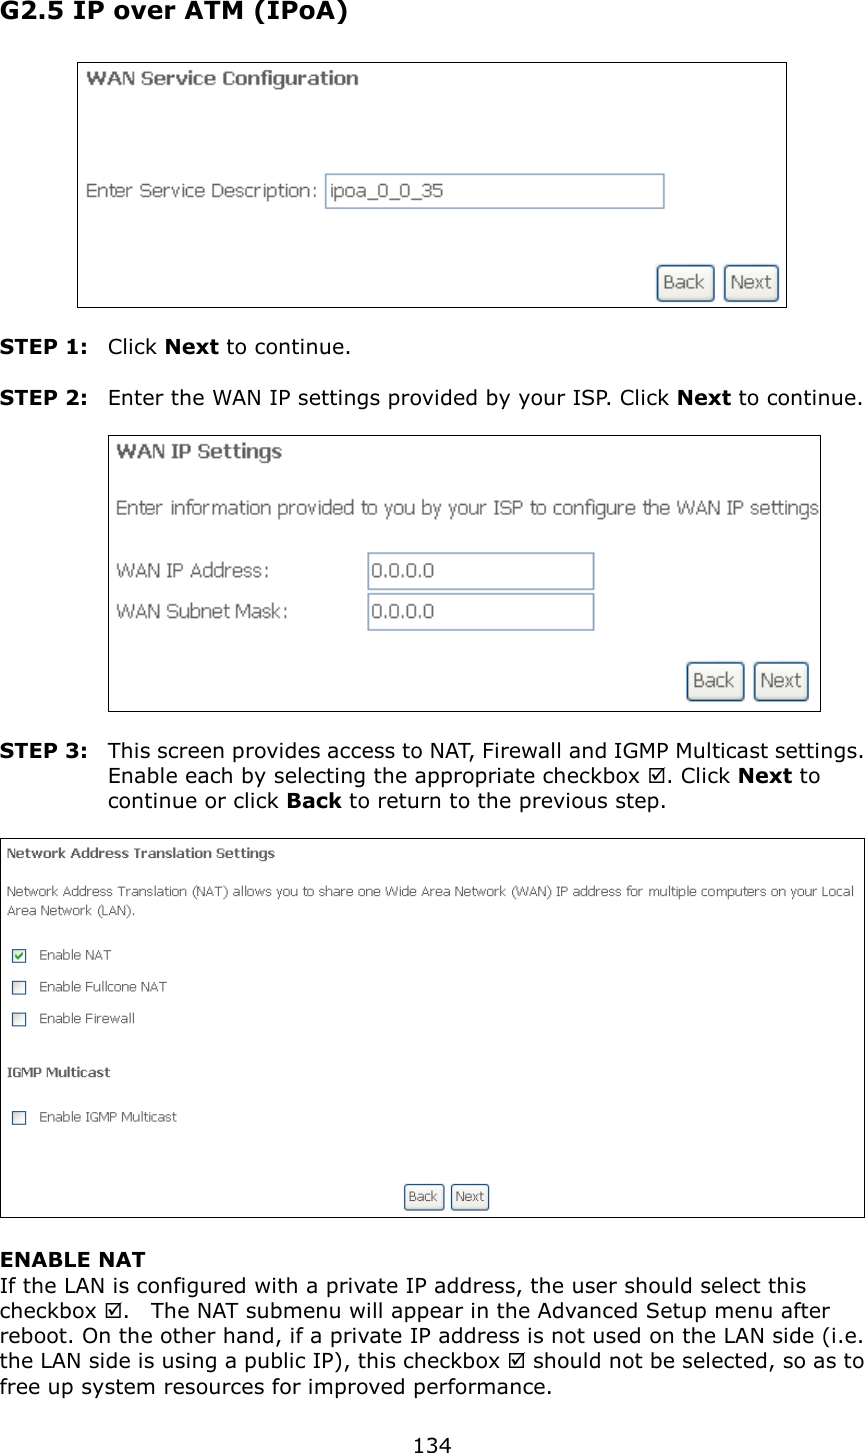   134 G2.5 IP over ATM (IPoA)   STEP 1:  Click Next to continue.  STEP 2:  Enter the WAN IP settings provided by your ISP. Click Next to continue.     STEP 3:  This screen provides access to NAT, Firewall and IGMP Multicast settings. Enable each by selecting the appropriate checkbox . Click Next to continue or click Back to return to the previous step.   ENABLE NAT If the LAN is configured with a private IP address, the user should select this checkbox .    The NAT submenu will appear in the Advanced Setup menu after reboot. On the other hand, if a private IP address is not used on the LAN side (i.e. the LAN side is using a public IP), this checkbox  should not be selected, so as to free up system resources for improved performance. 